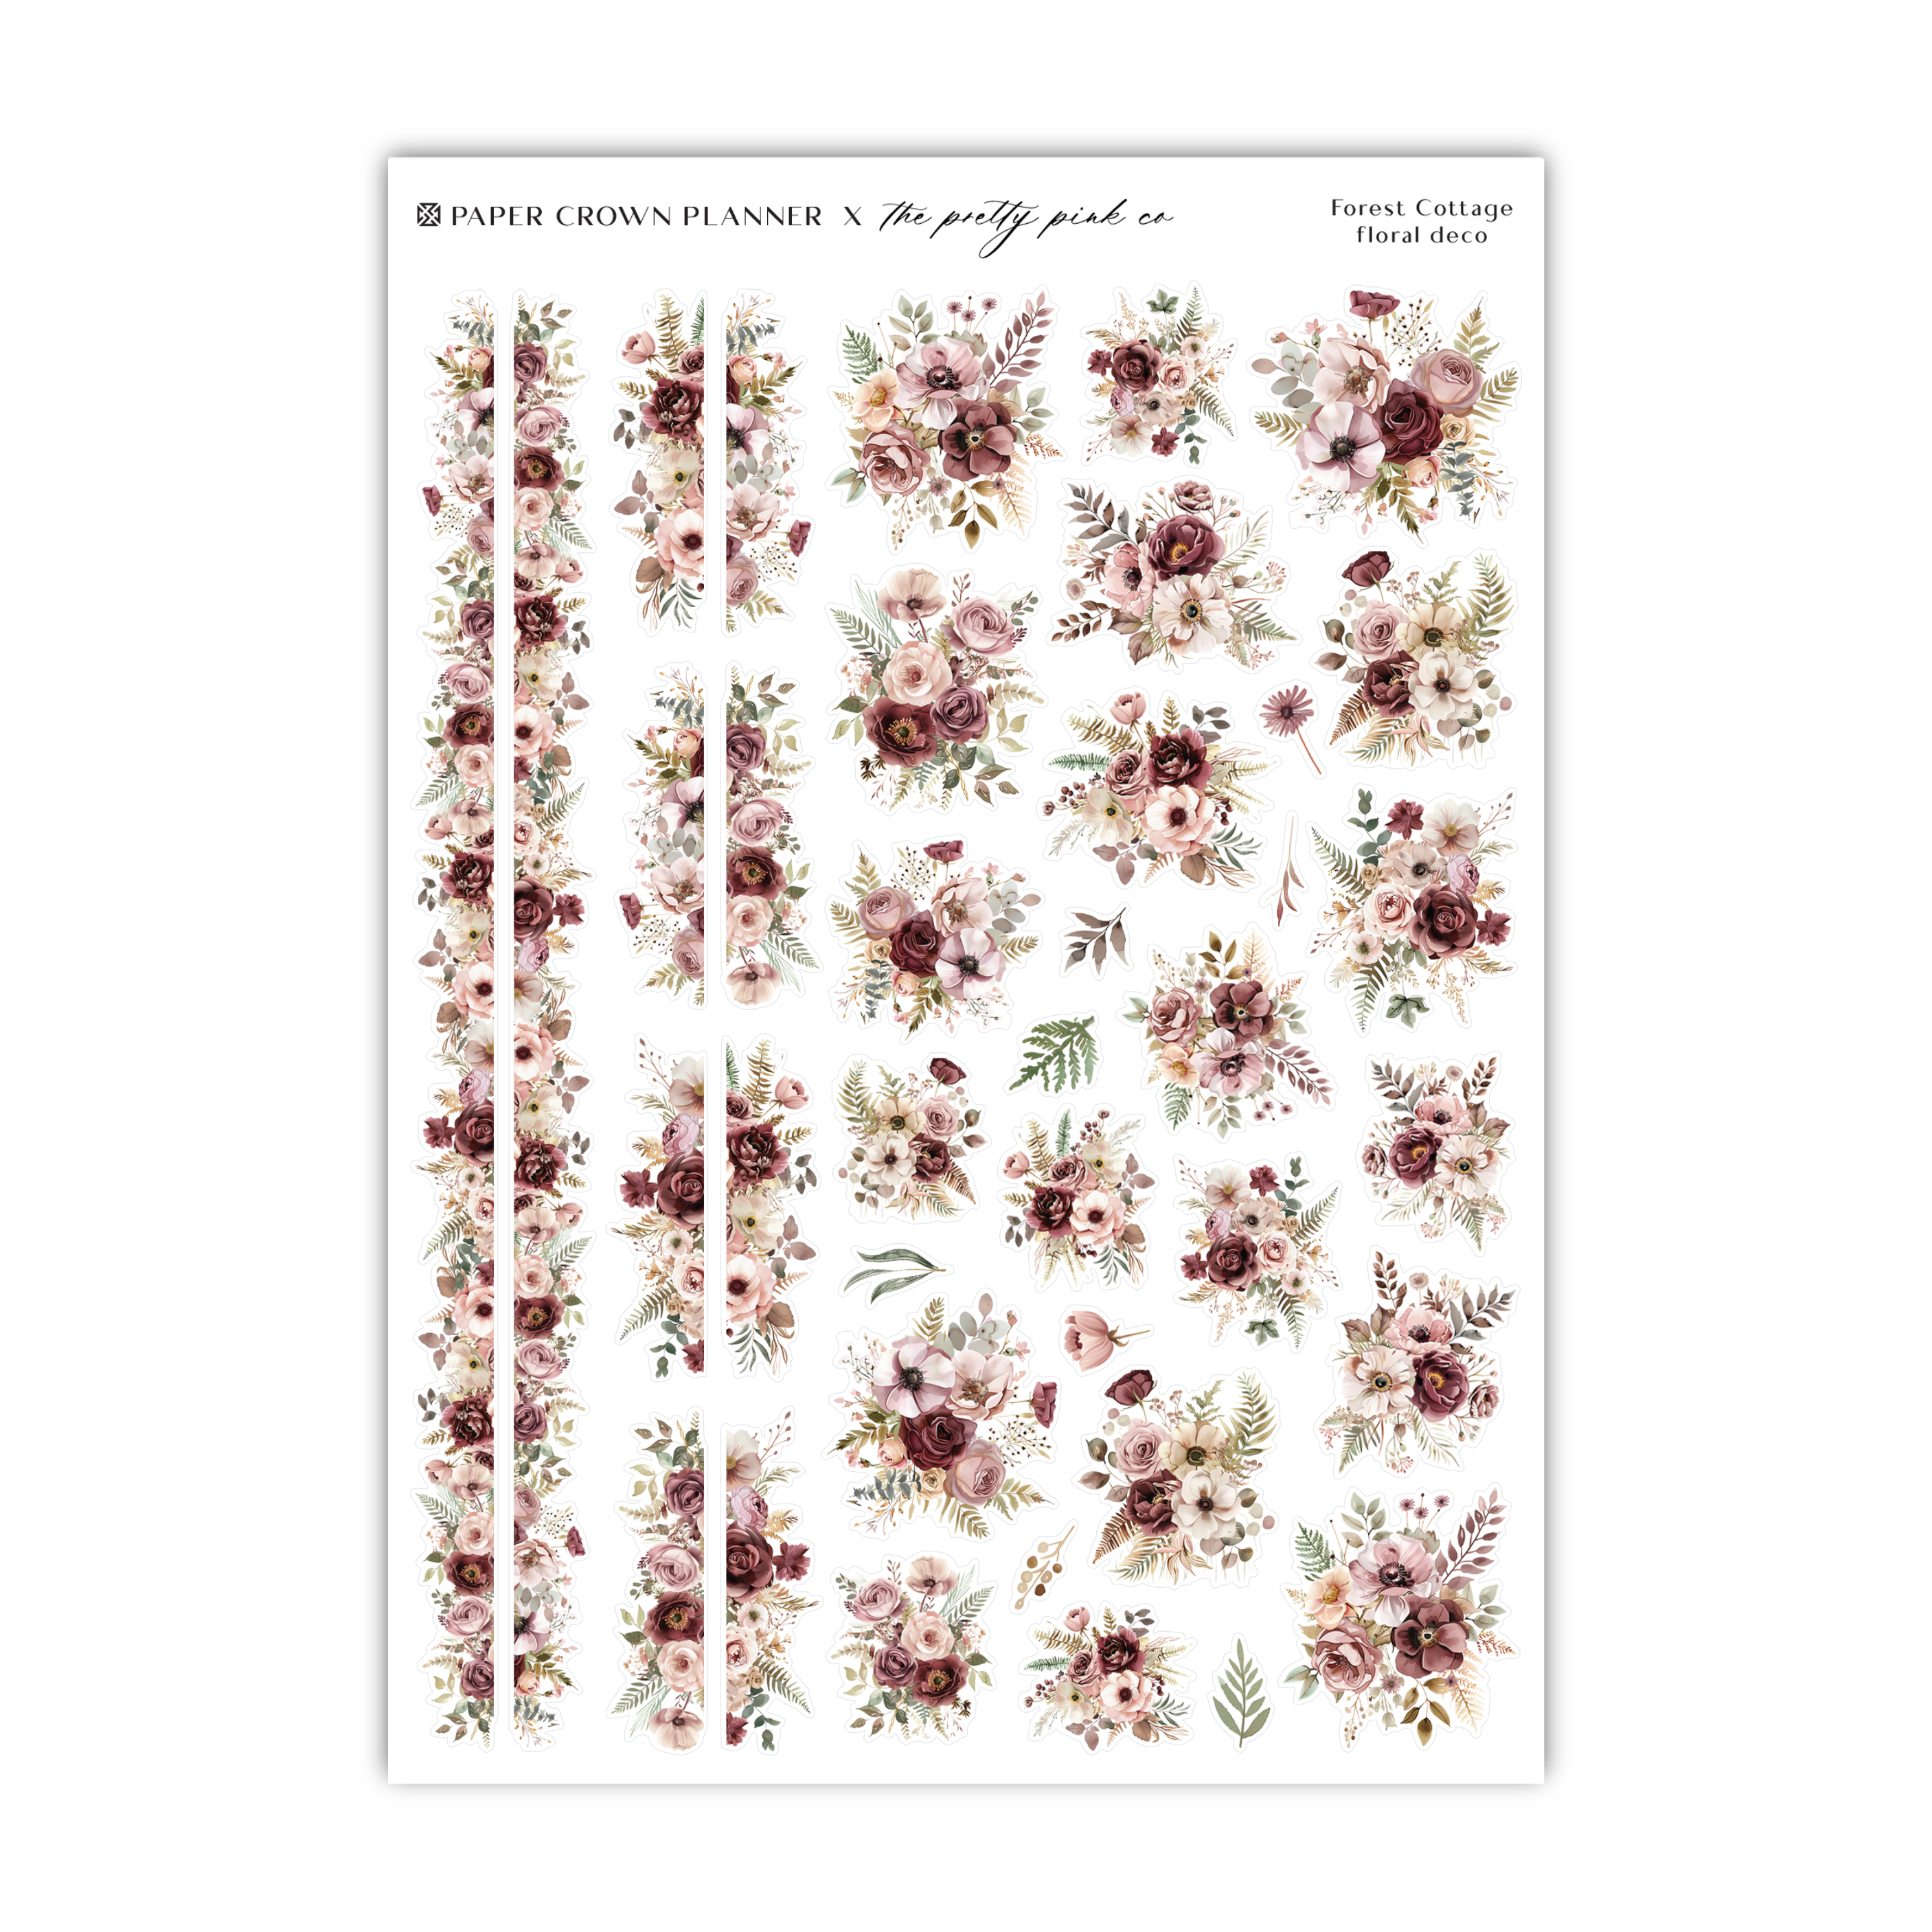 a sheet of stickers with flowers on them